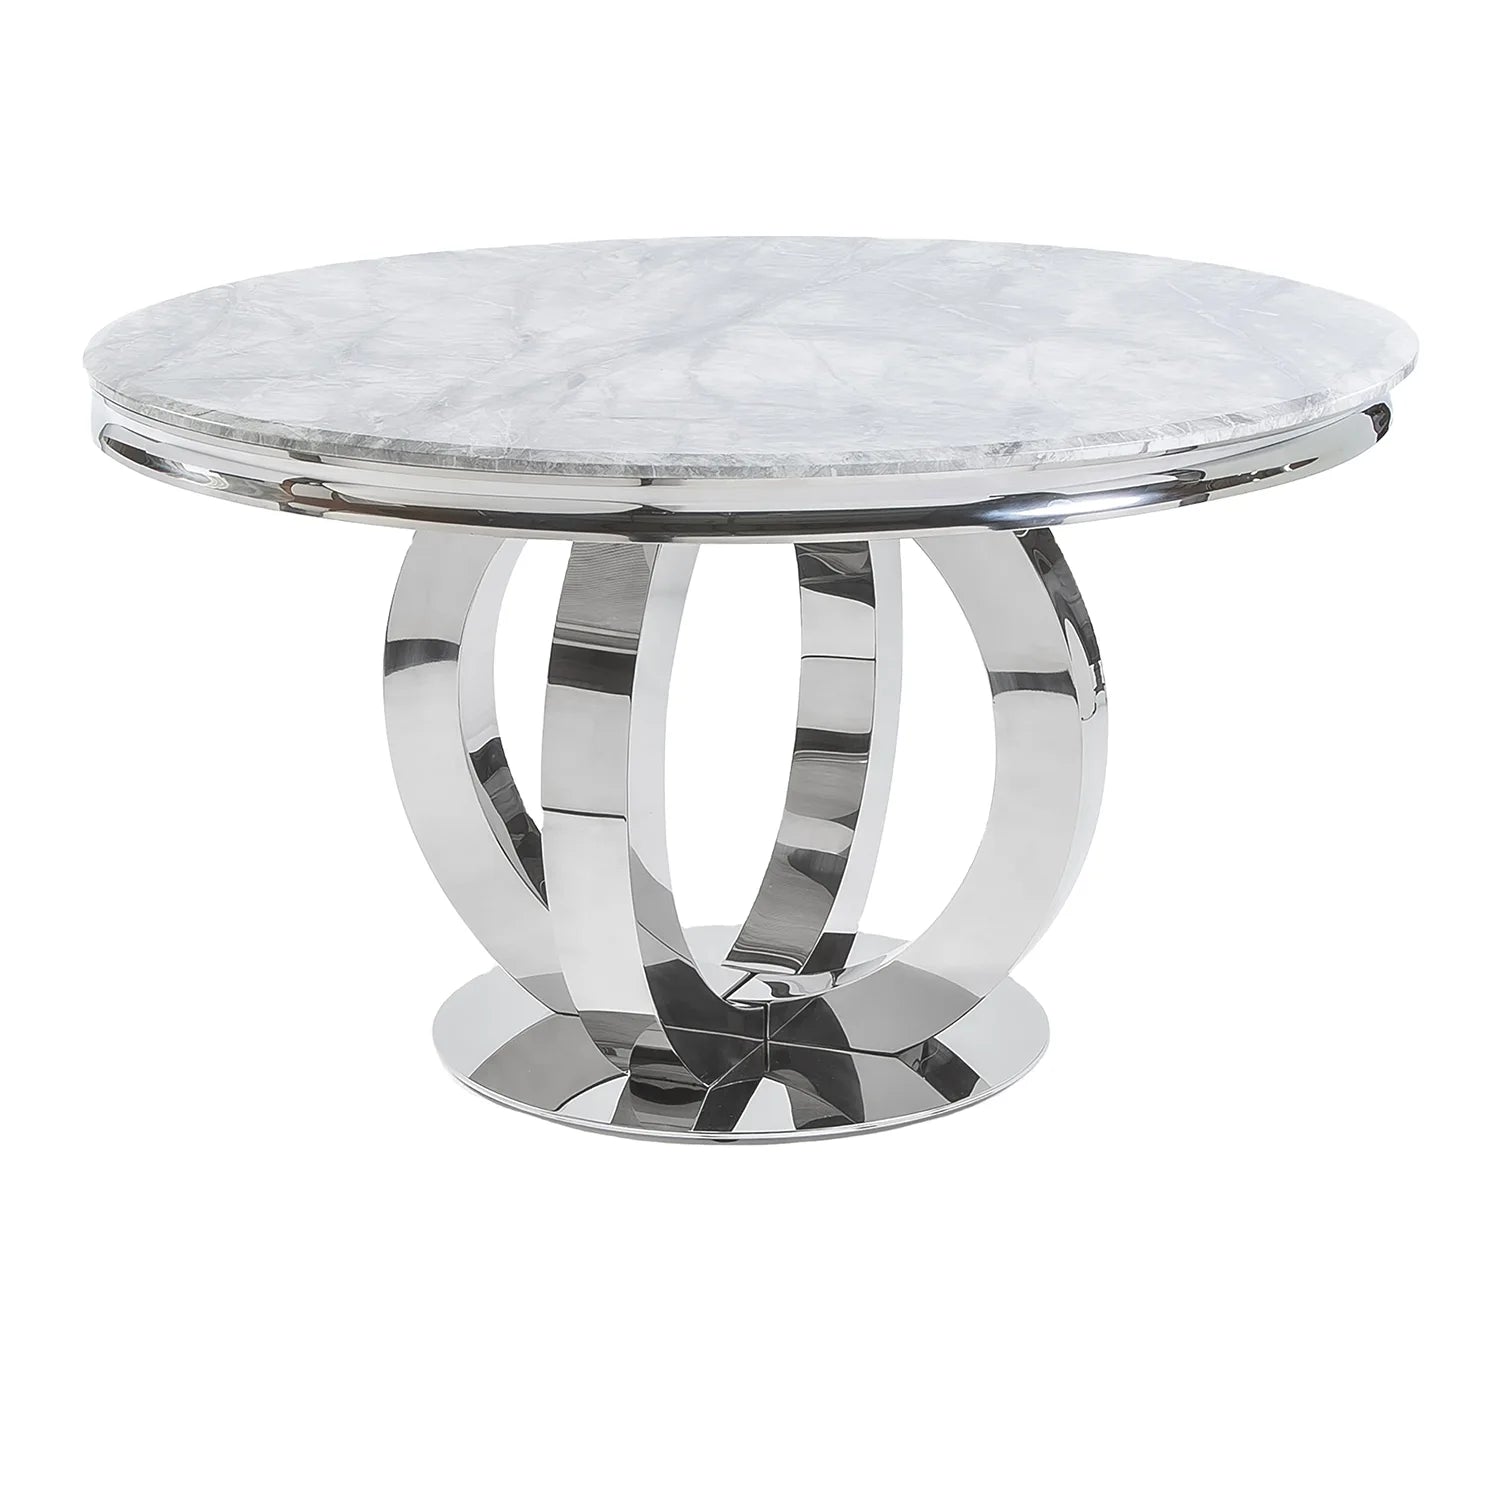 Arianna Round Light Grey Marble Top Dining Table